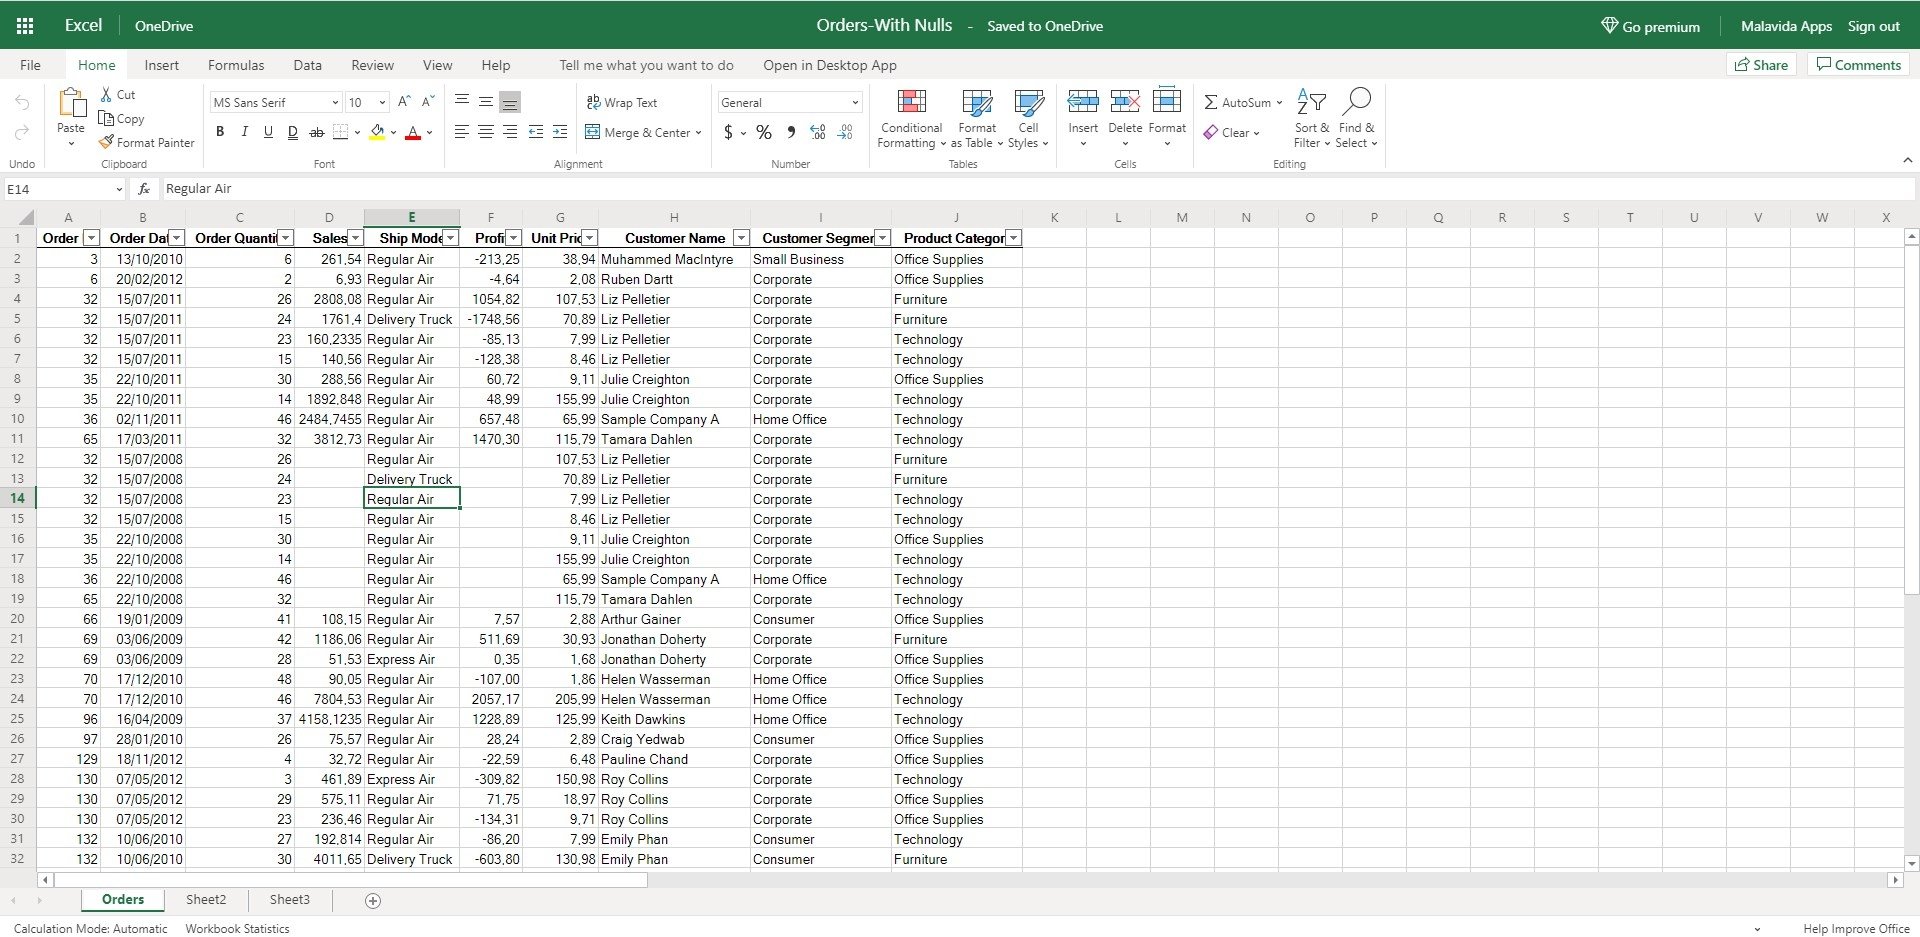 microsoft free excel download 2010